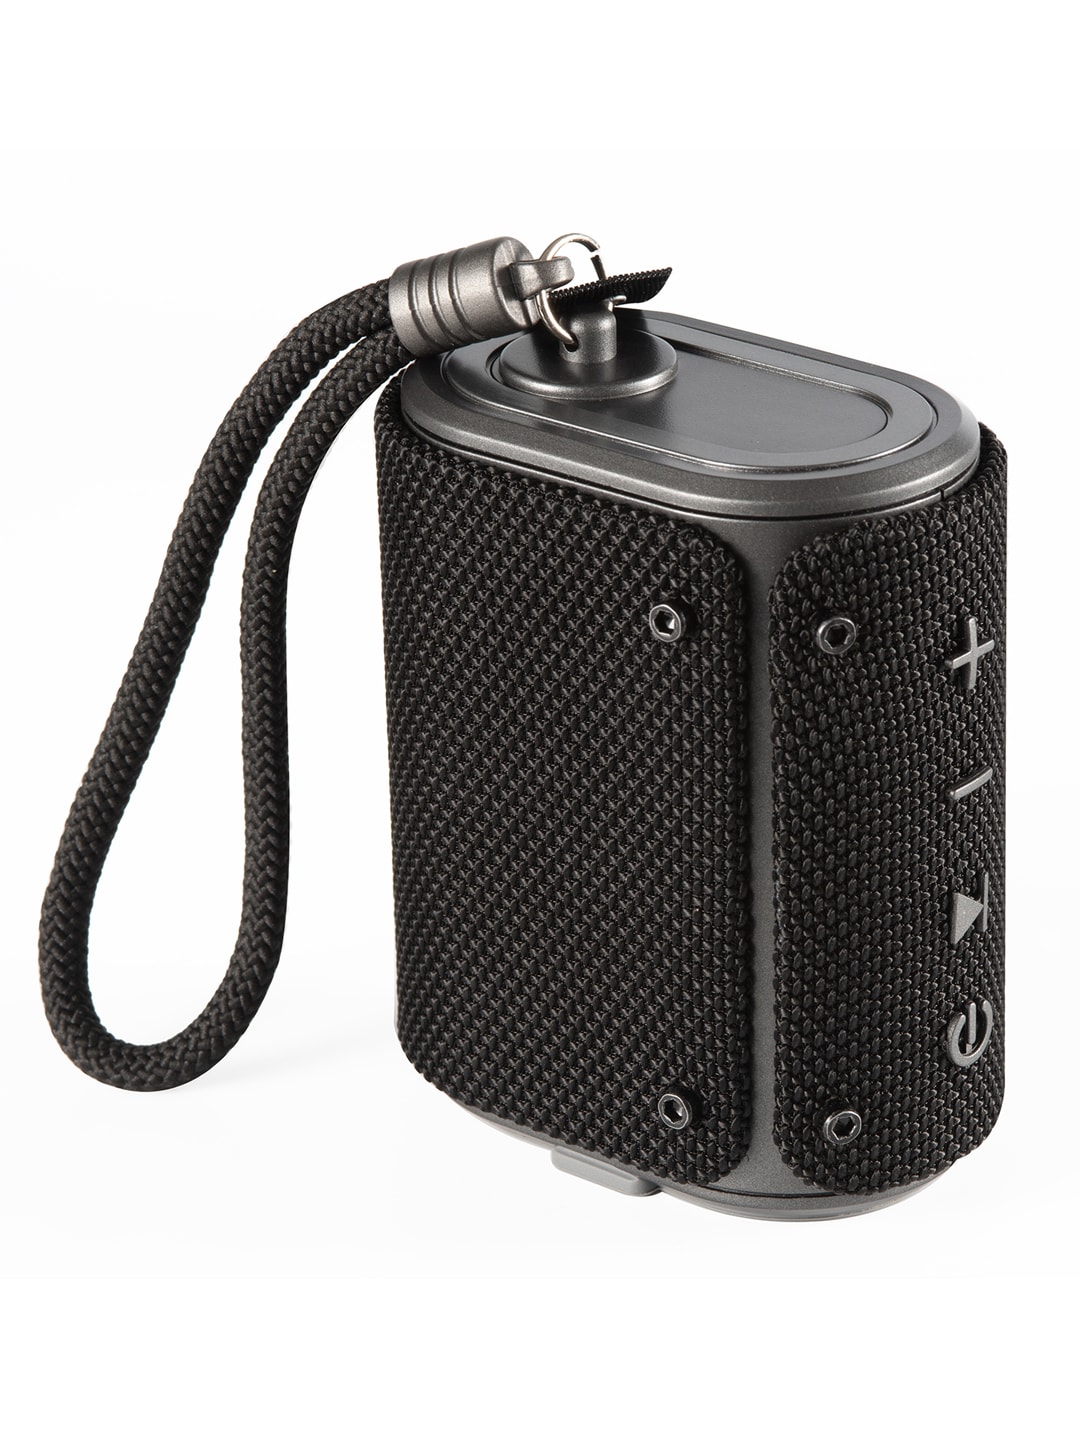 boAt Stone Grenade M 5W Portable Wireless Speaker with Rugged IPX6 Design & 7H Playback Price in India